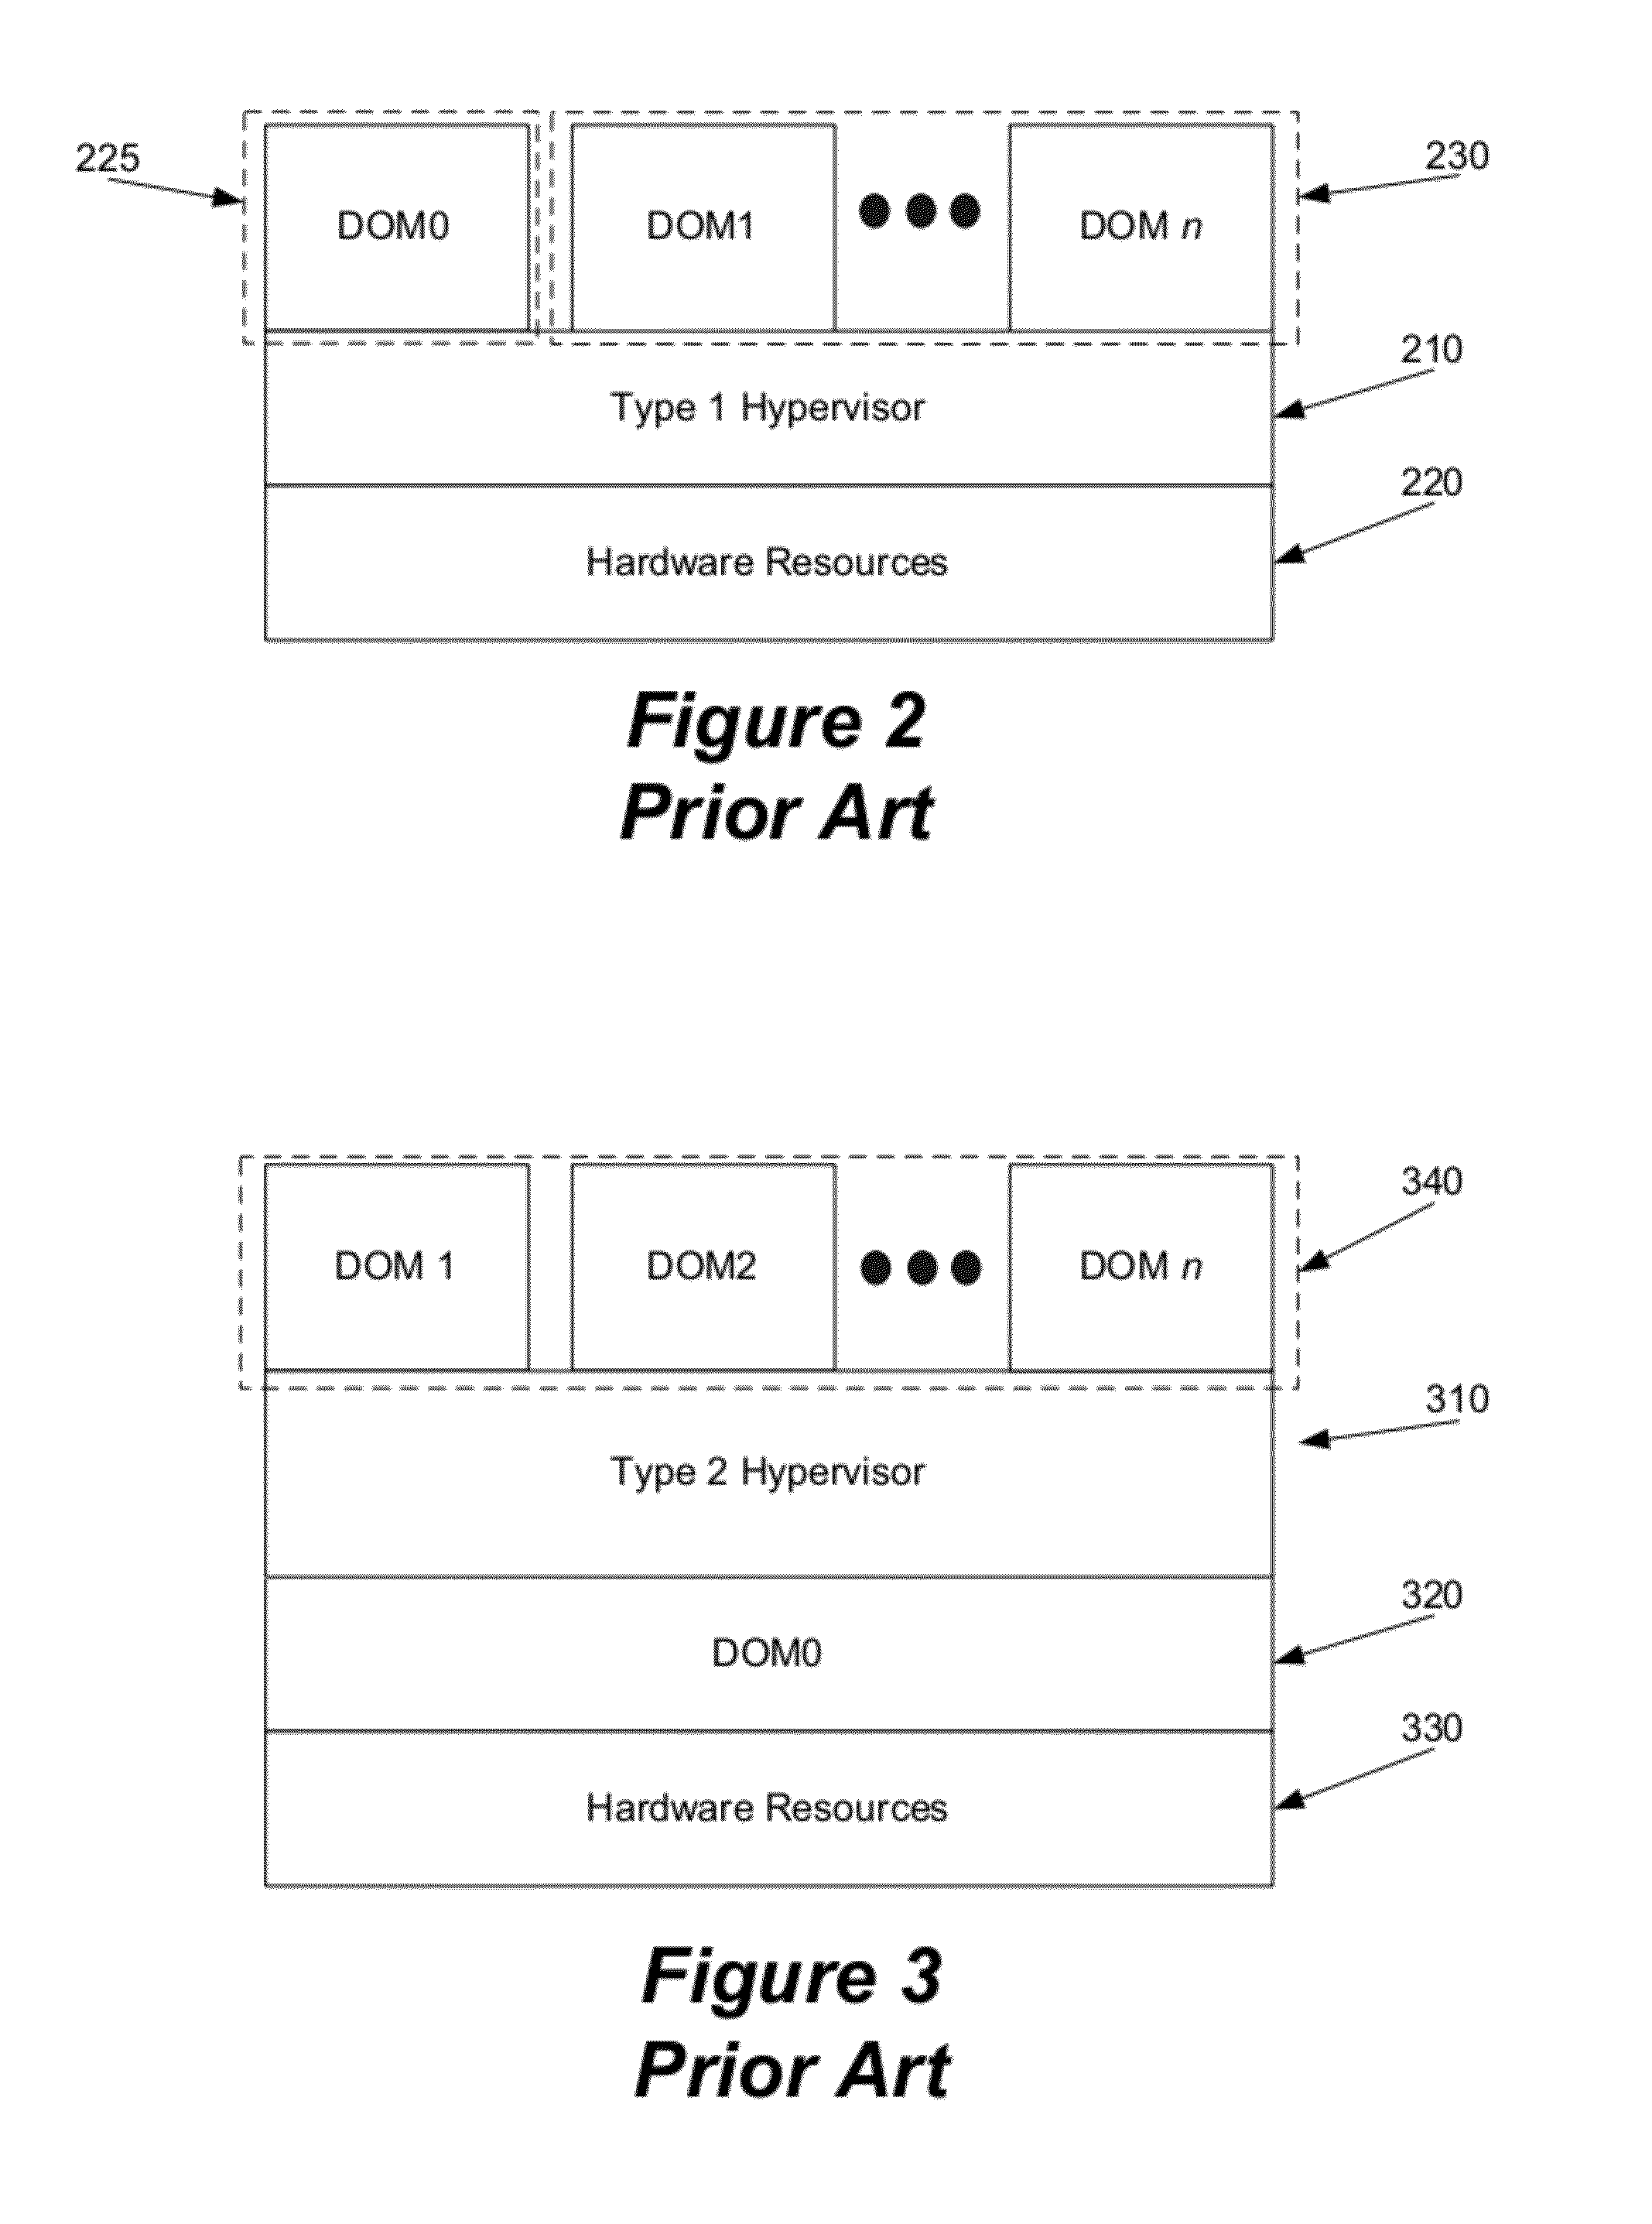 System and method for automated configuration of hosting resources